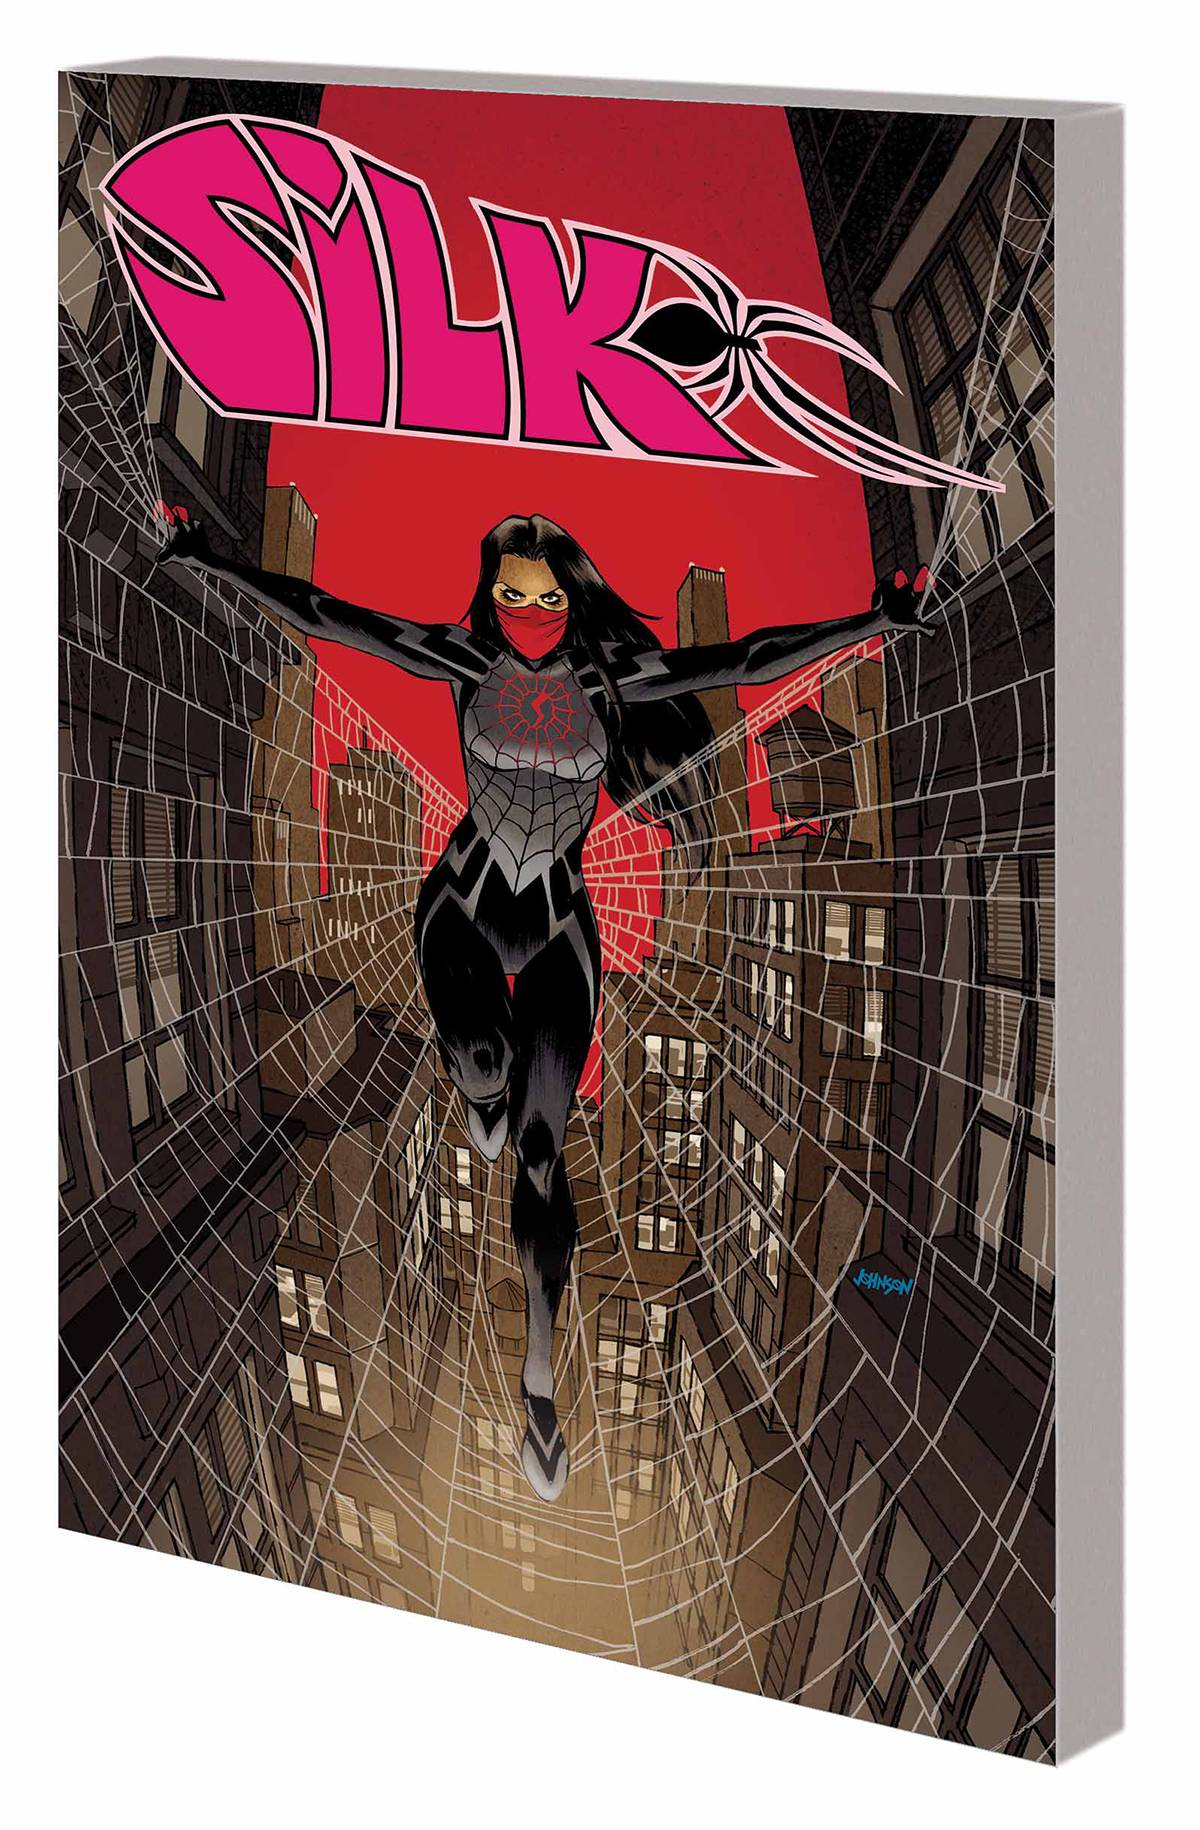 Silk Graphic Novel Volume 0 Life And Times of Cindy Moon